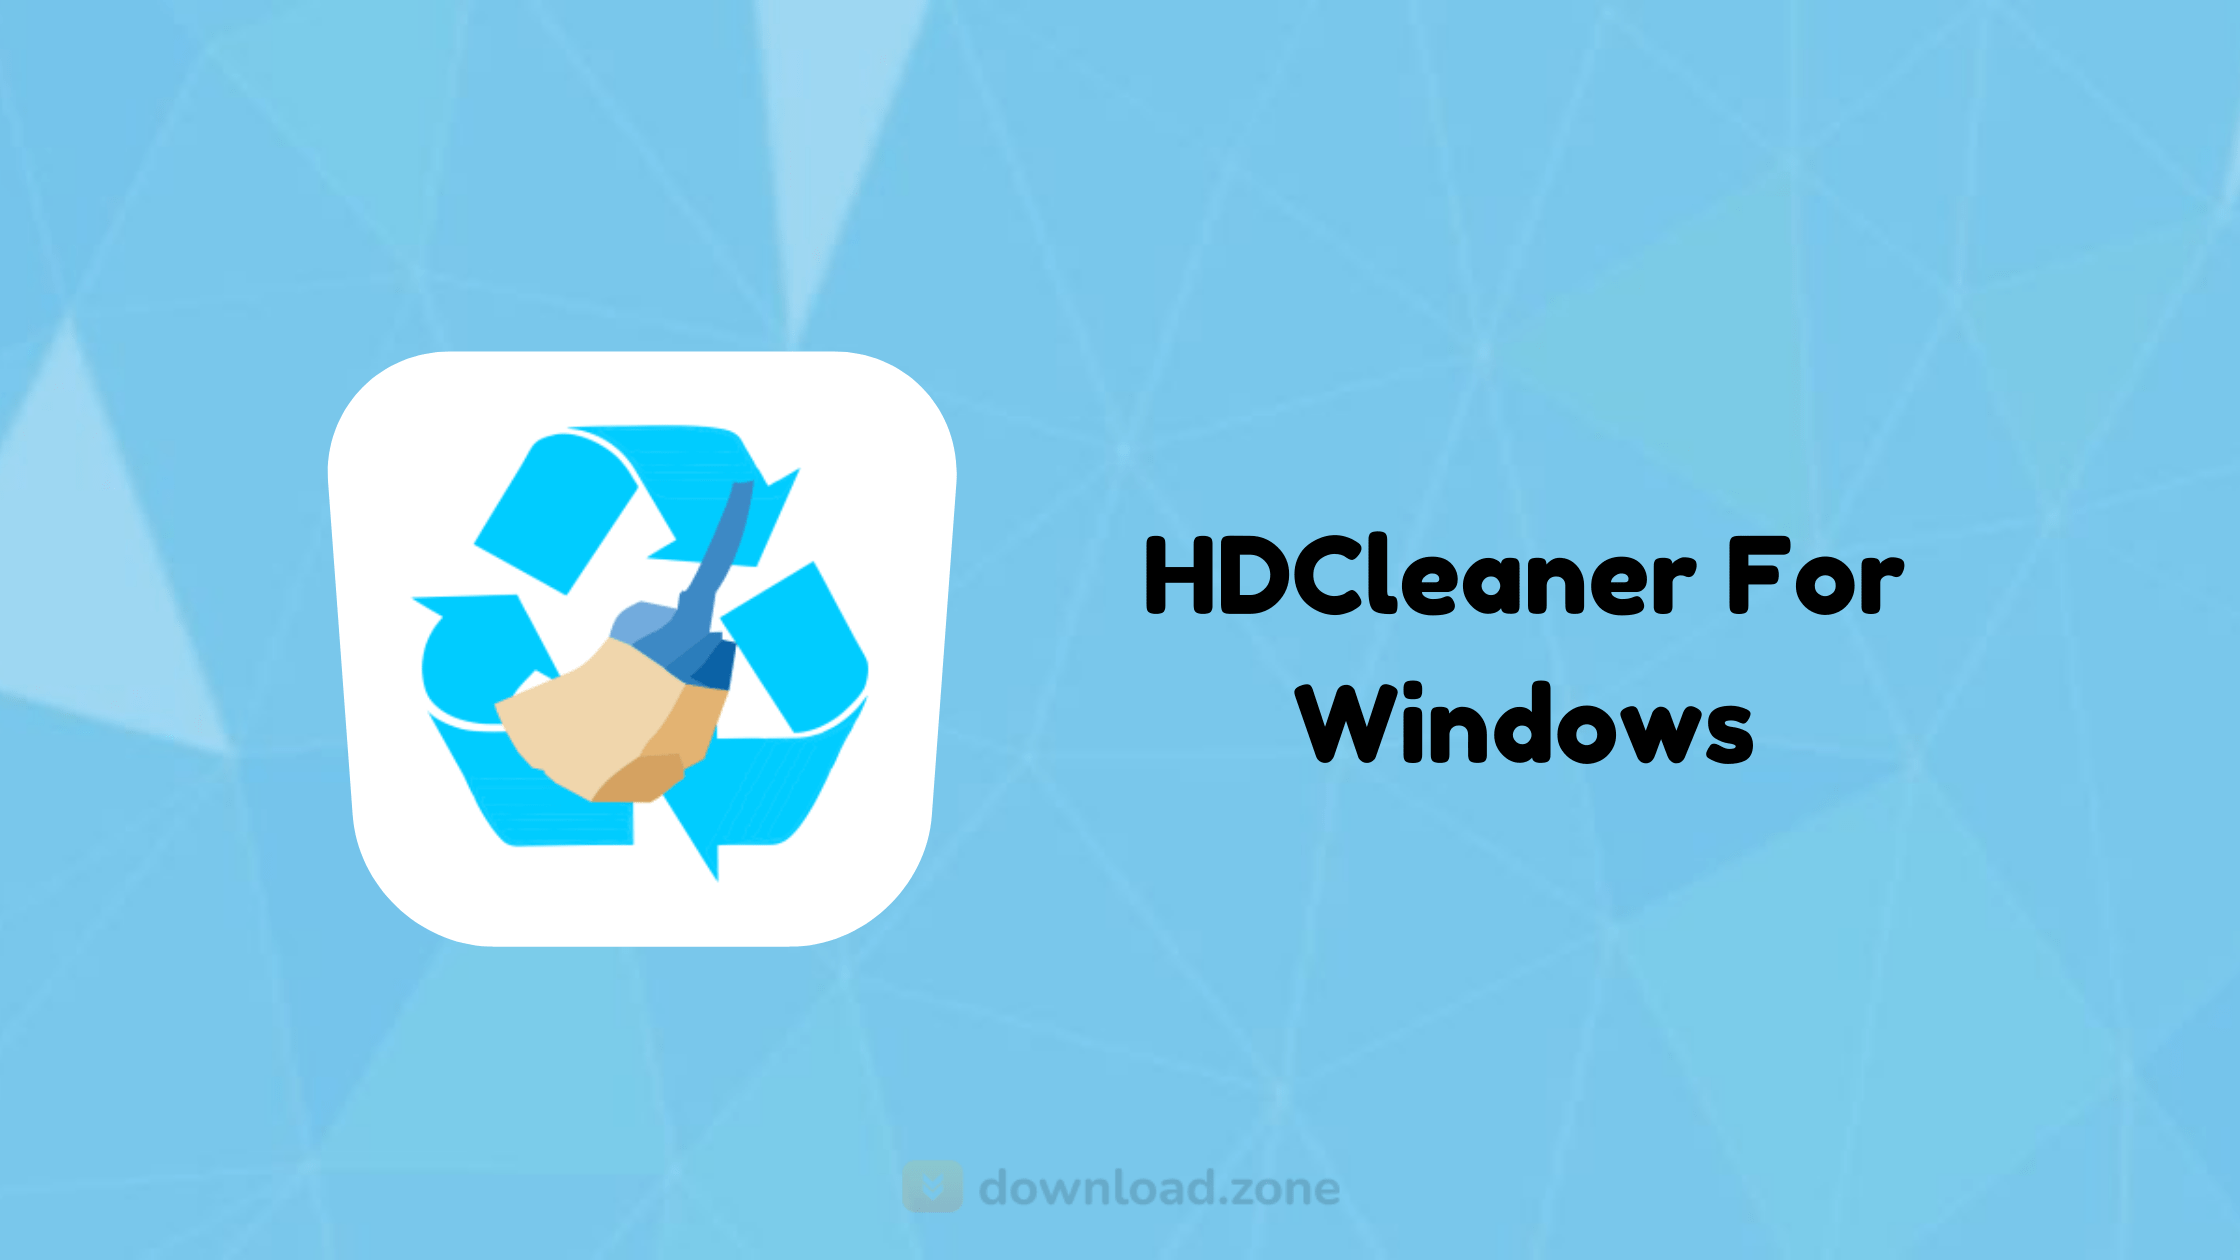 instal the new version for windows HDCleaner 2.057